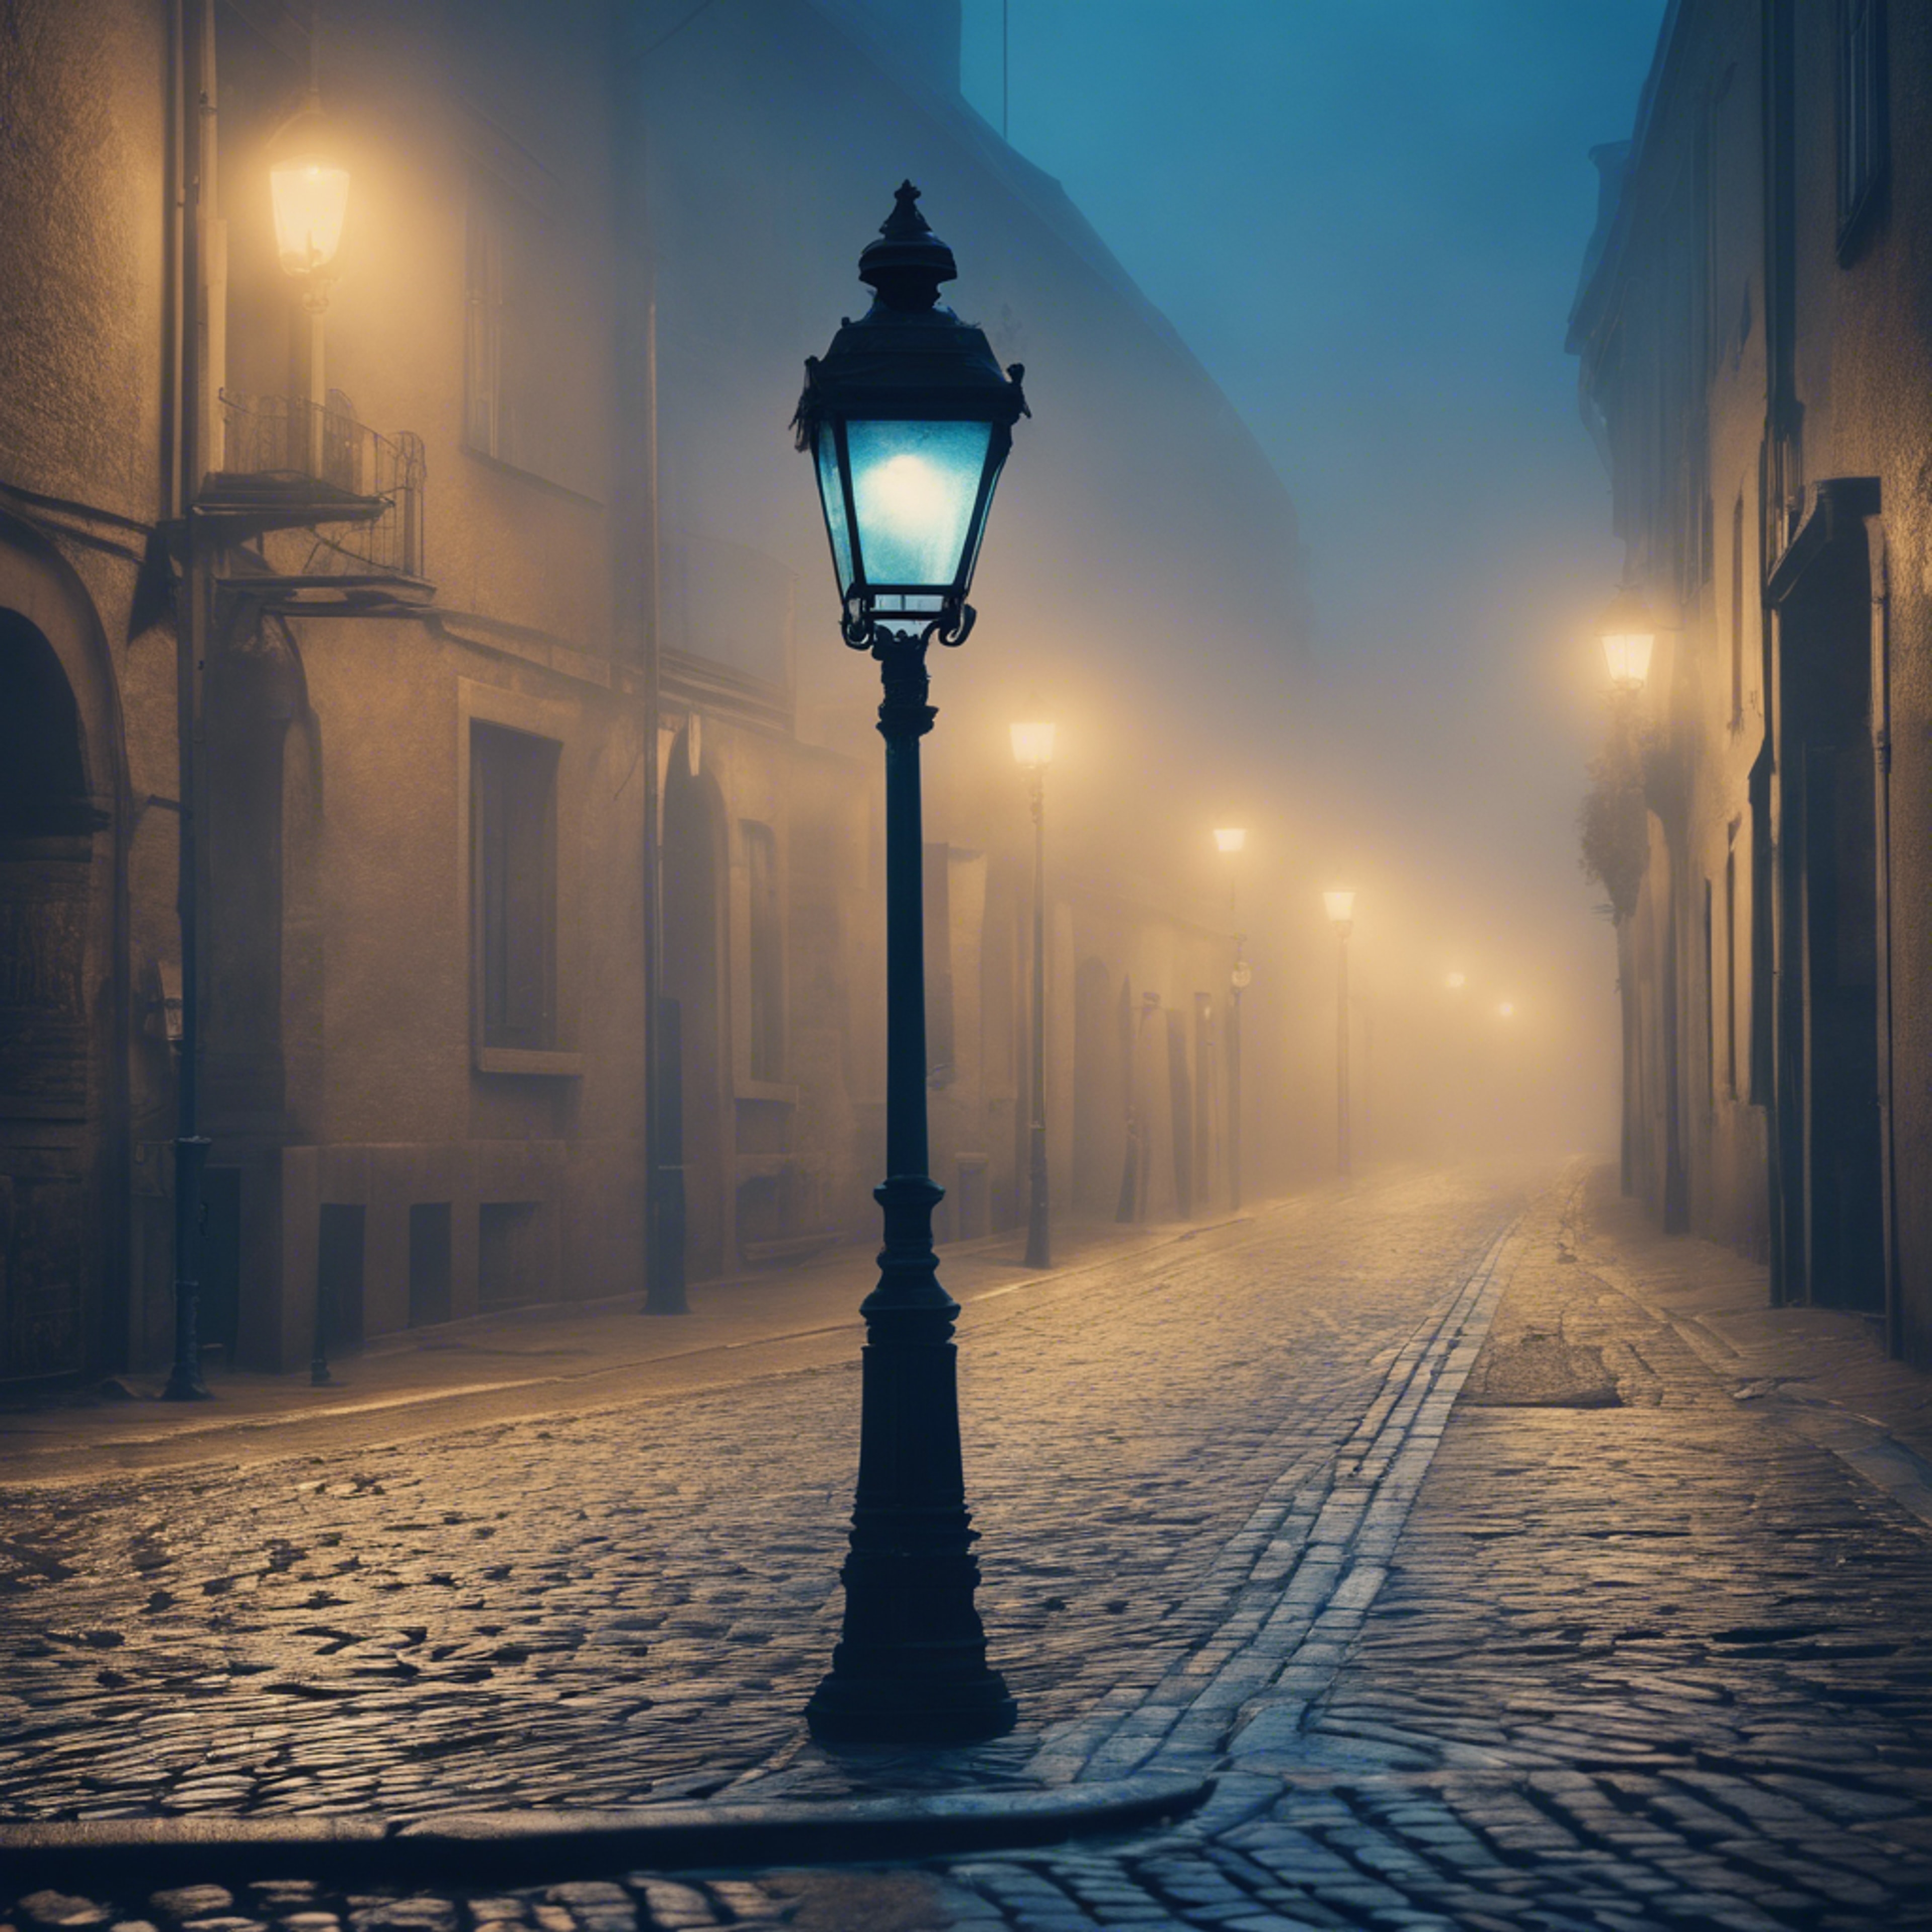 A foggy image of a cobblestone street lit by an old blue lamp post. Tapet[86a8420f9b4d45a484bd]